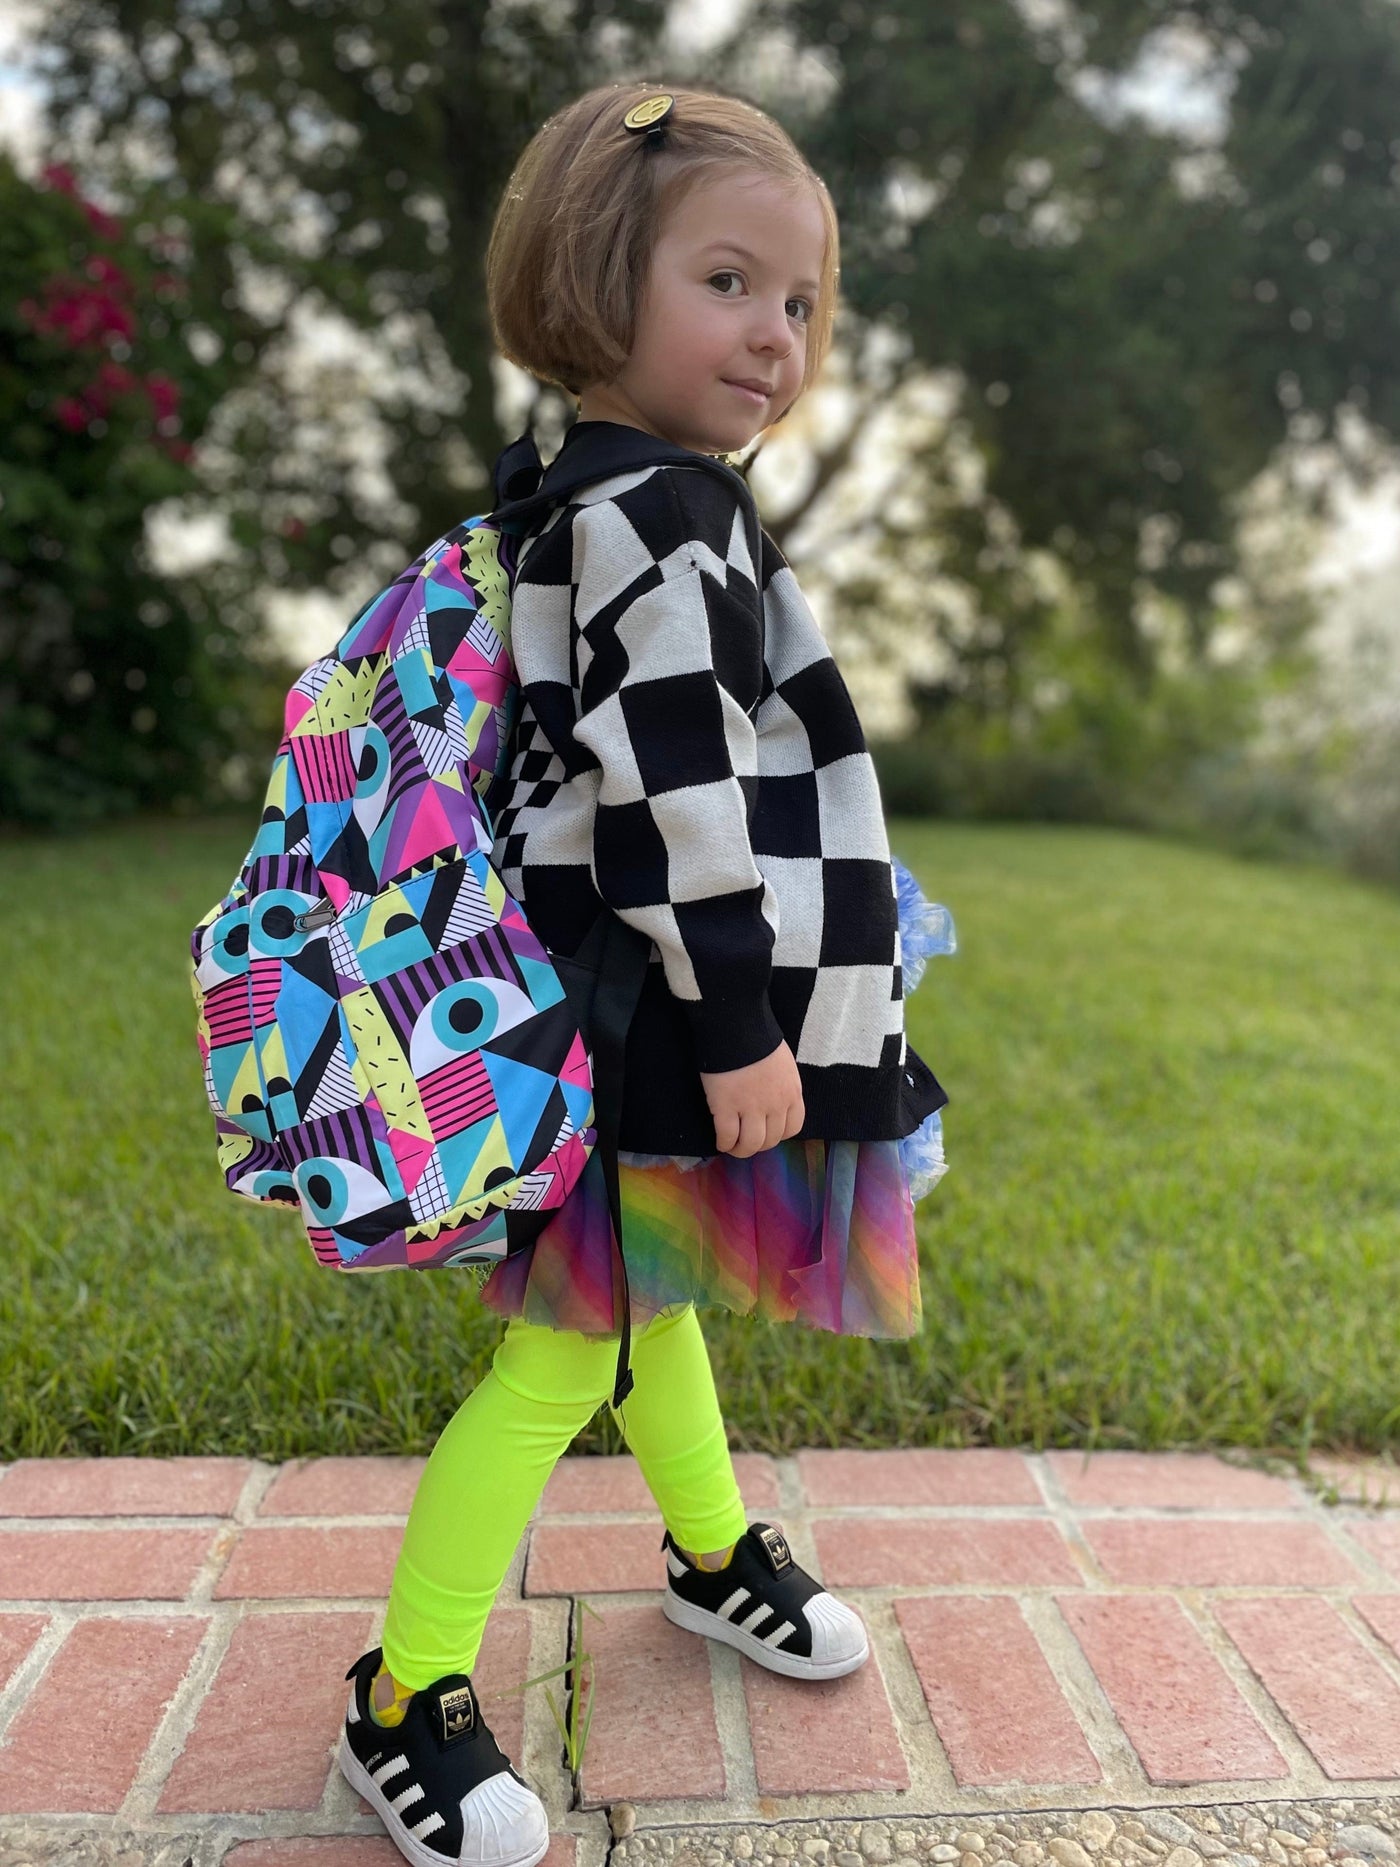 Best Day Ever Kids Bags Cool Kid Backpack - Eye See You buy online boutique kids clothing